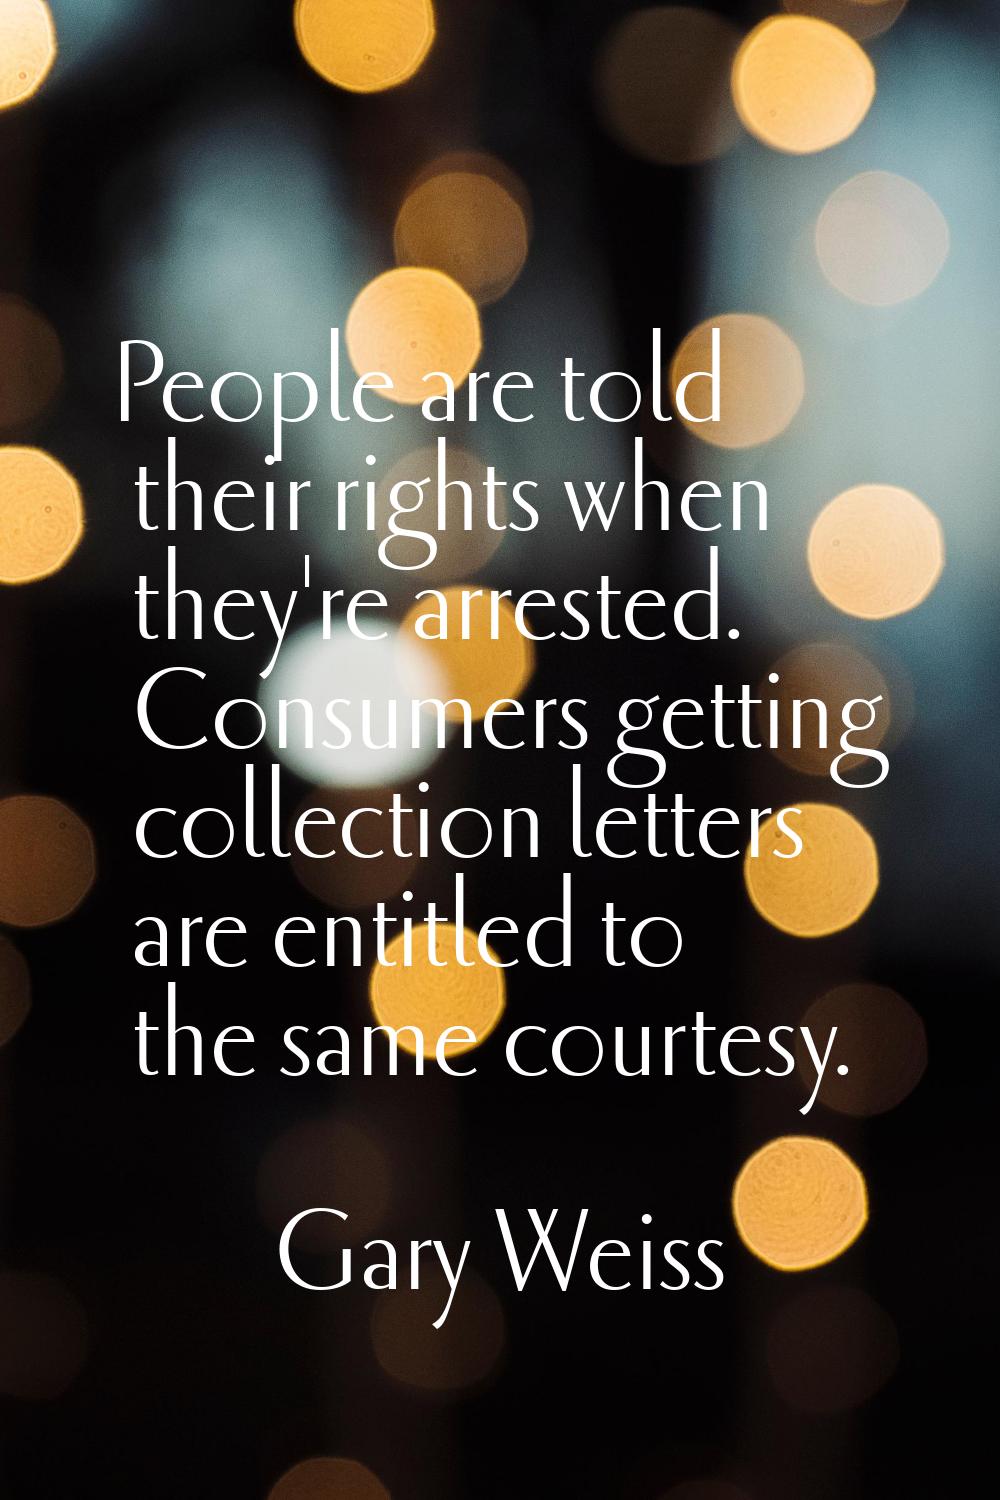 People are told their rights when they're arrested. Consumers getting collection letters are entitl